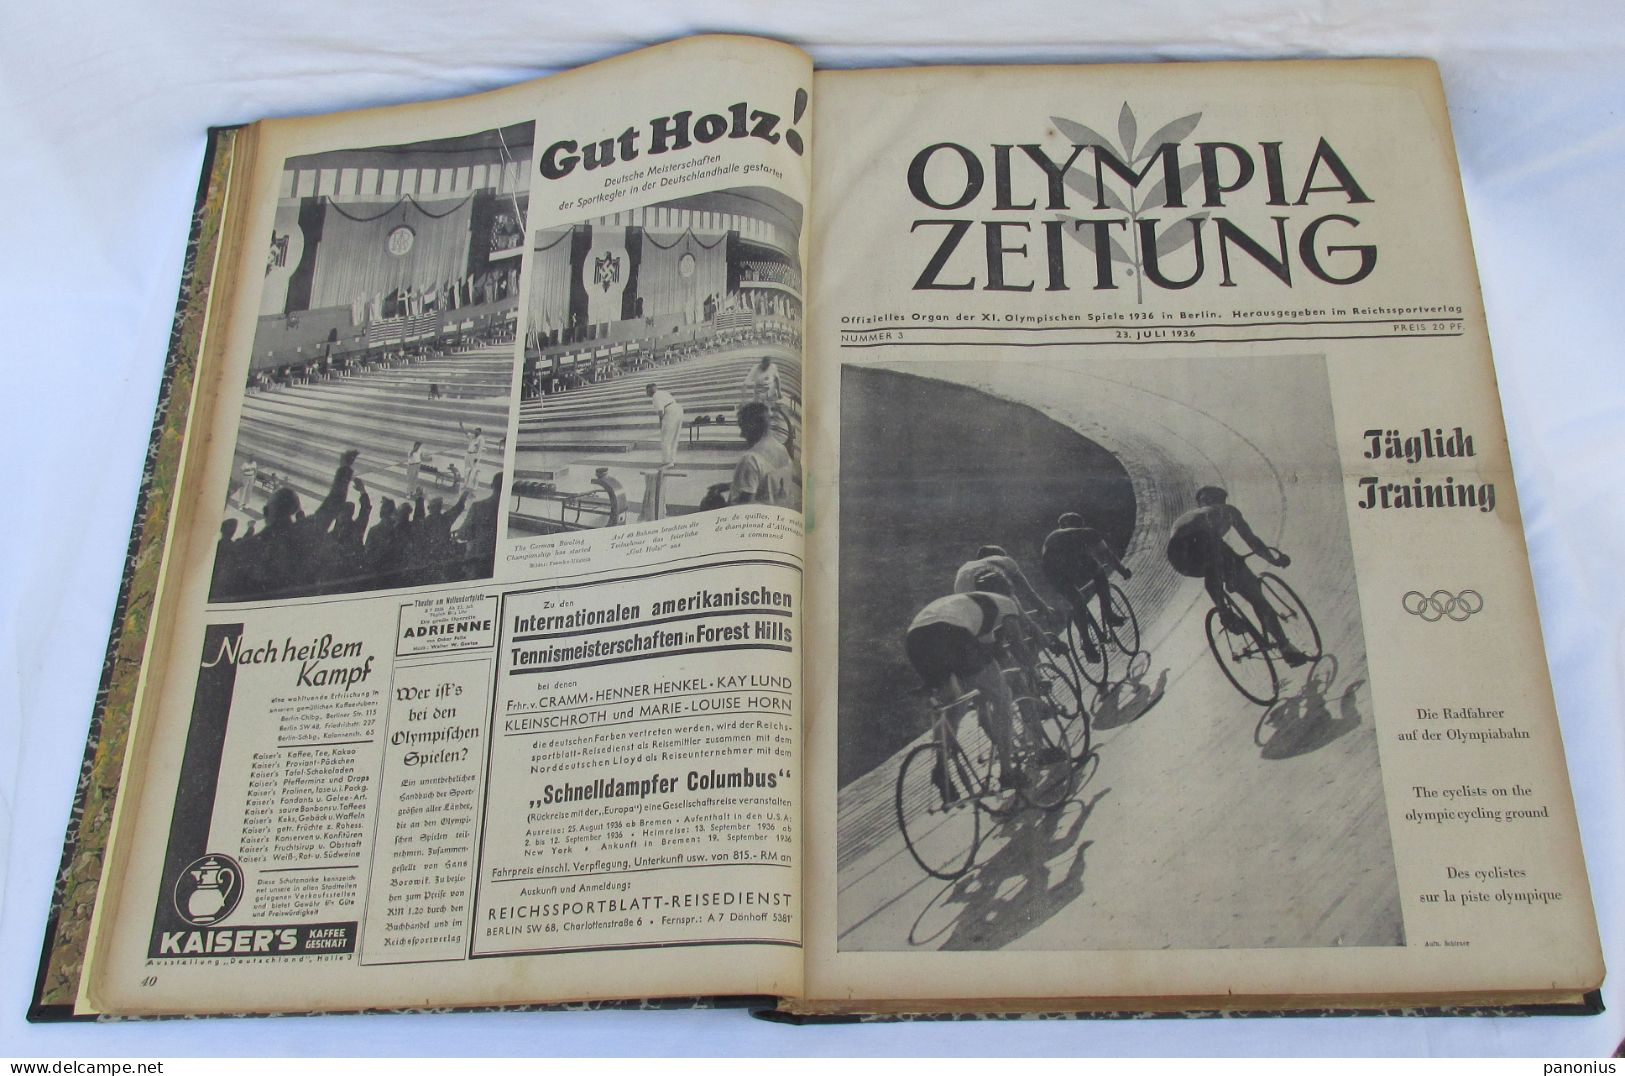 OLYMPIA ZEITUNG NEWSPAPER OLYMPIC GAMES BERLIN GERMANY 1936 SET 30 NUMBERS!!! - Bekleidung, Souvenirs Und Sonstige